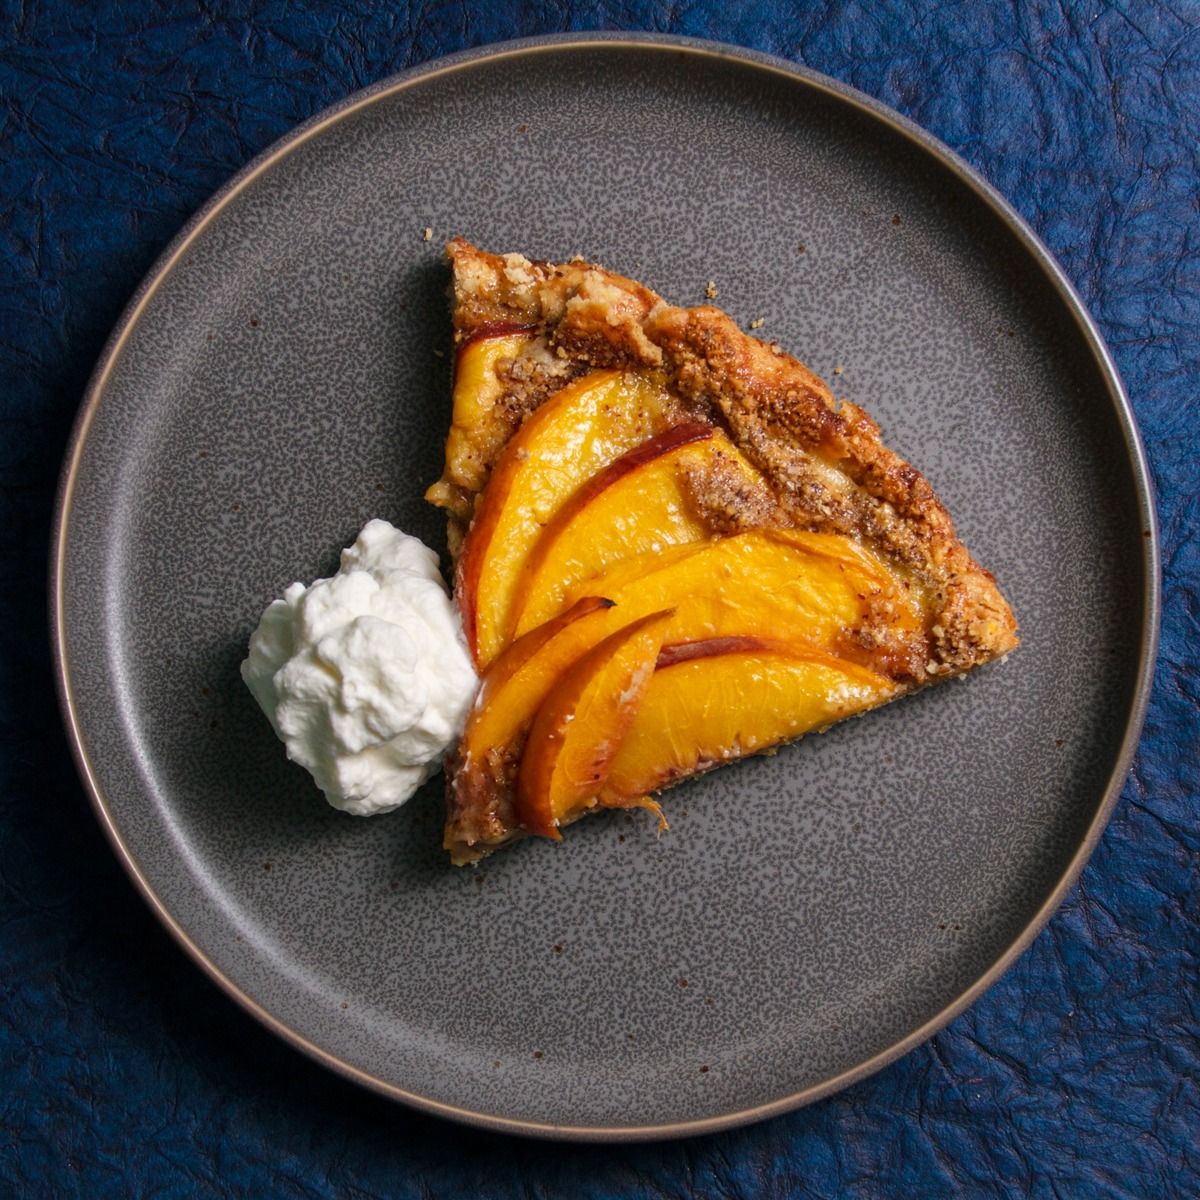 Slice of Peach Galette with whipped cream